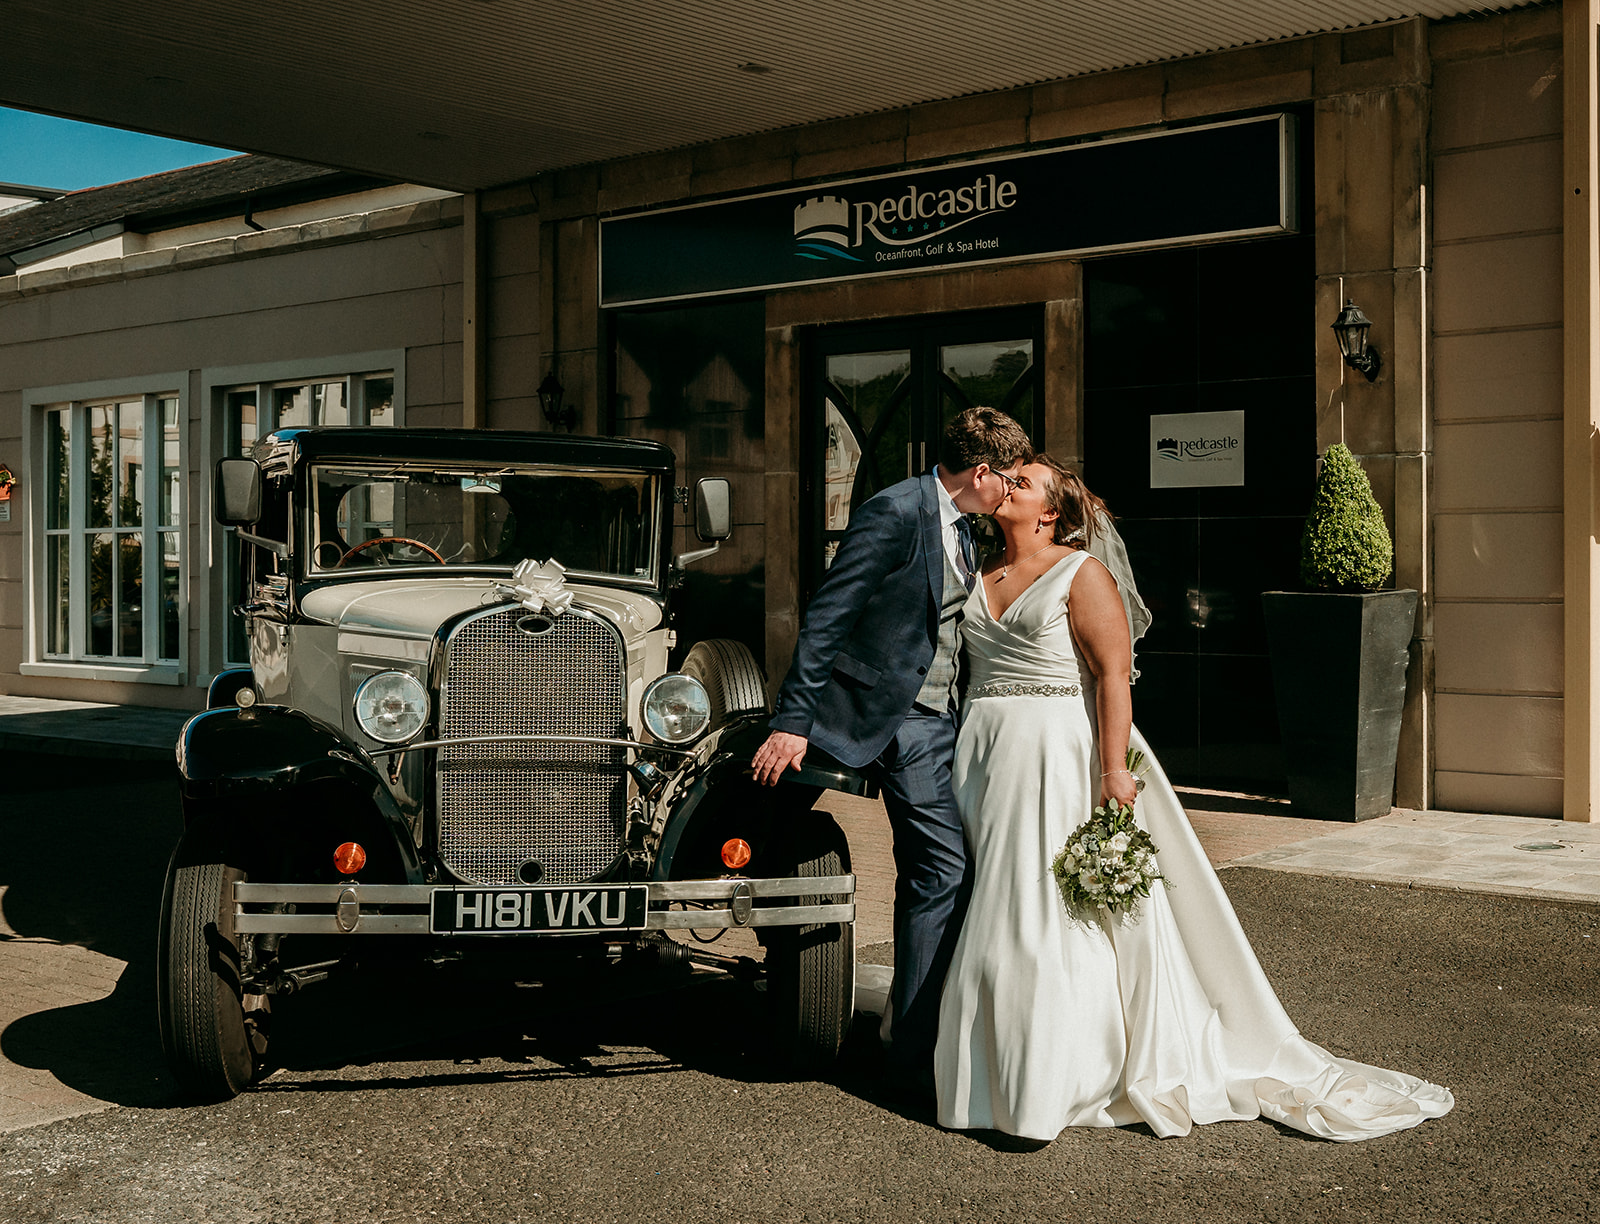 Lisdale Wedding Car Bride and Groom shot at the red castle hotel donegal 